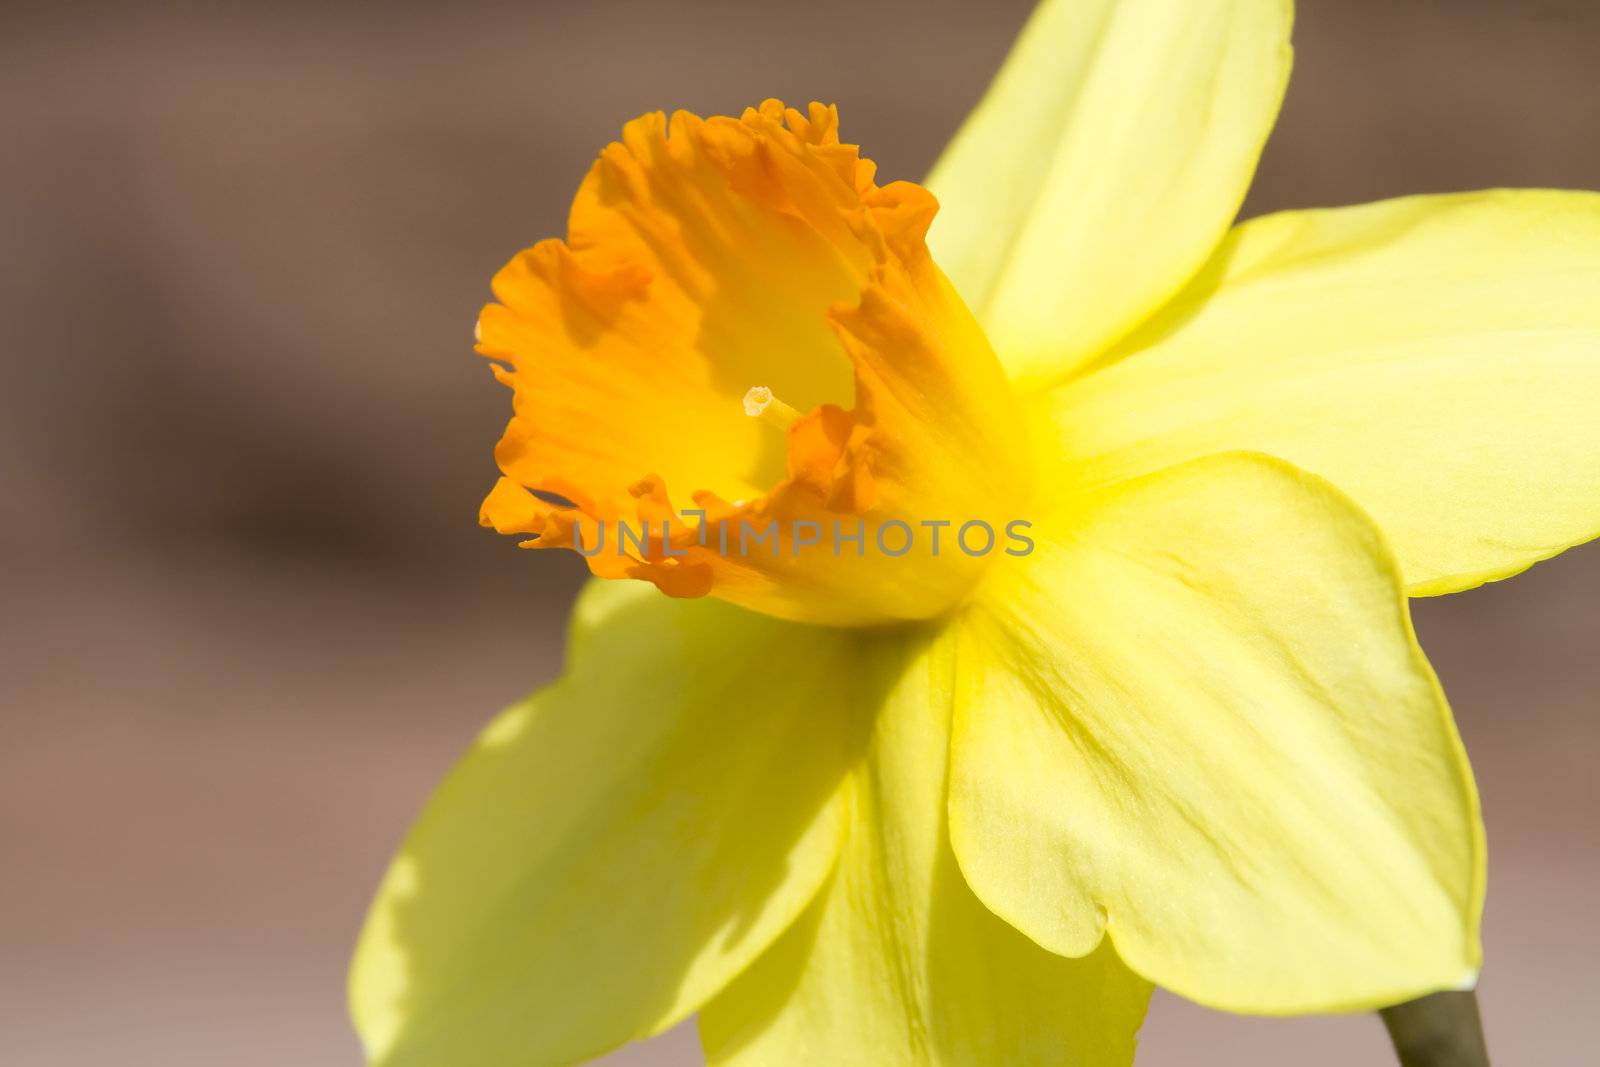 This image shows a macro from a yellow daffodil